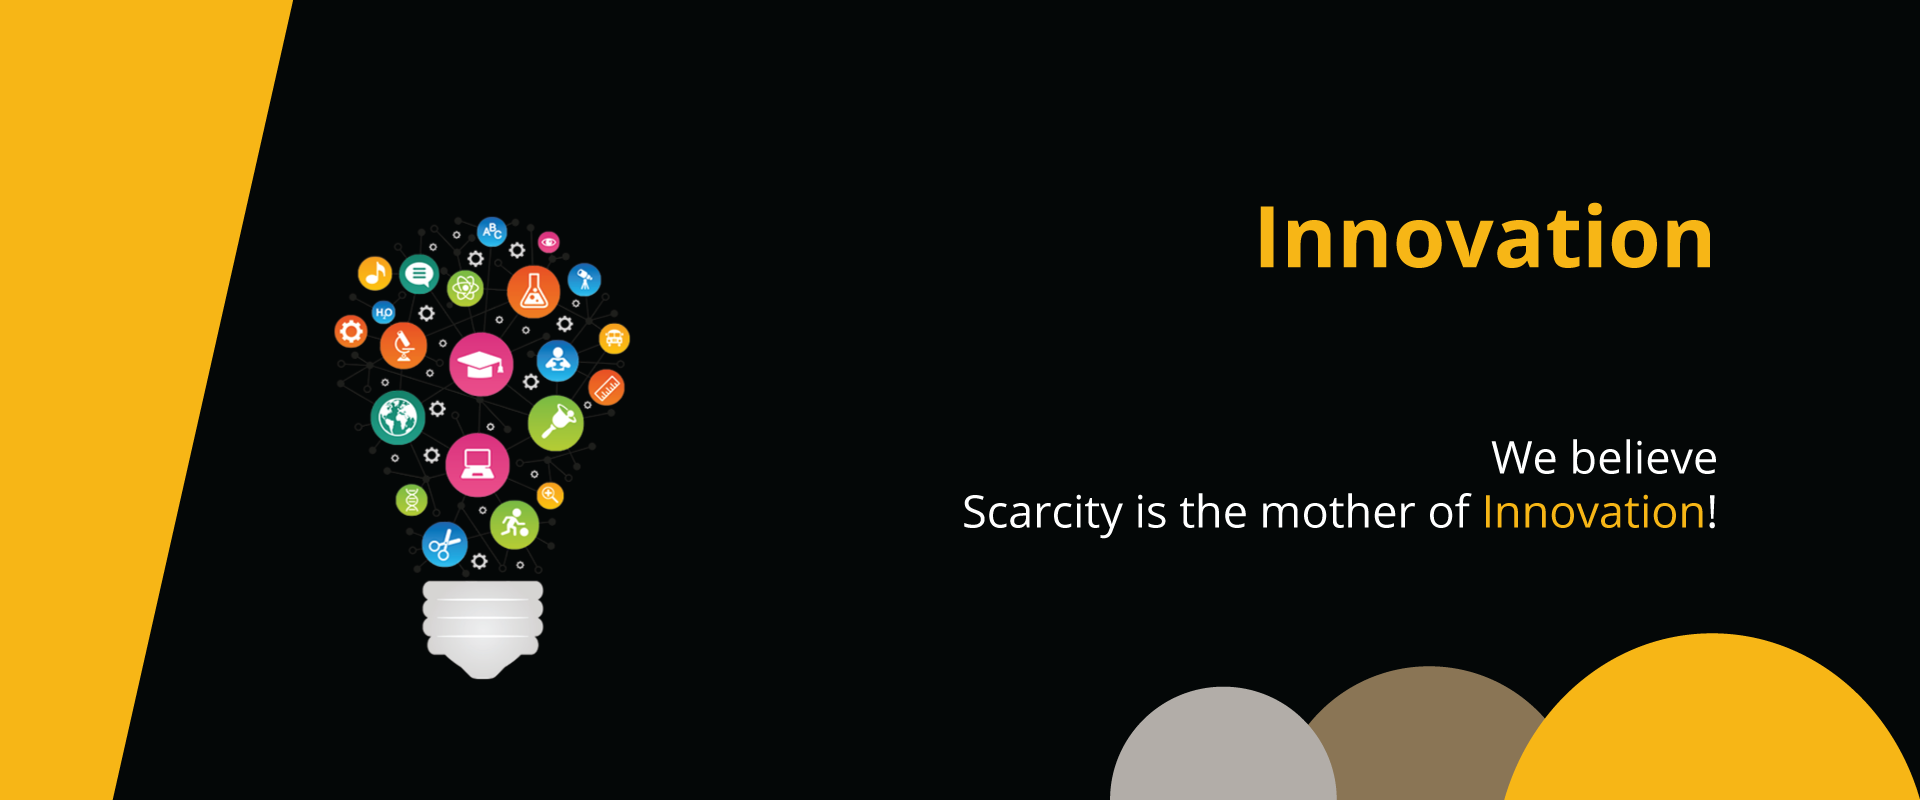 We Believe Scarcity is the mother innovation